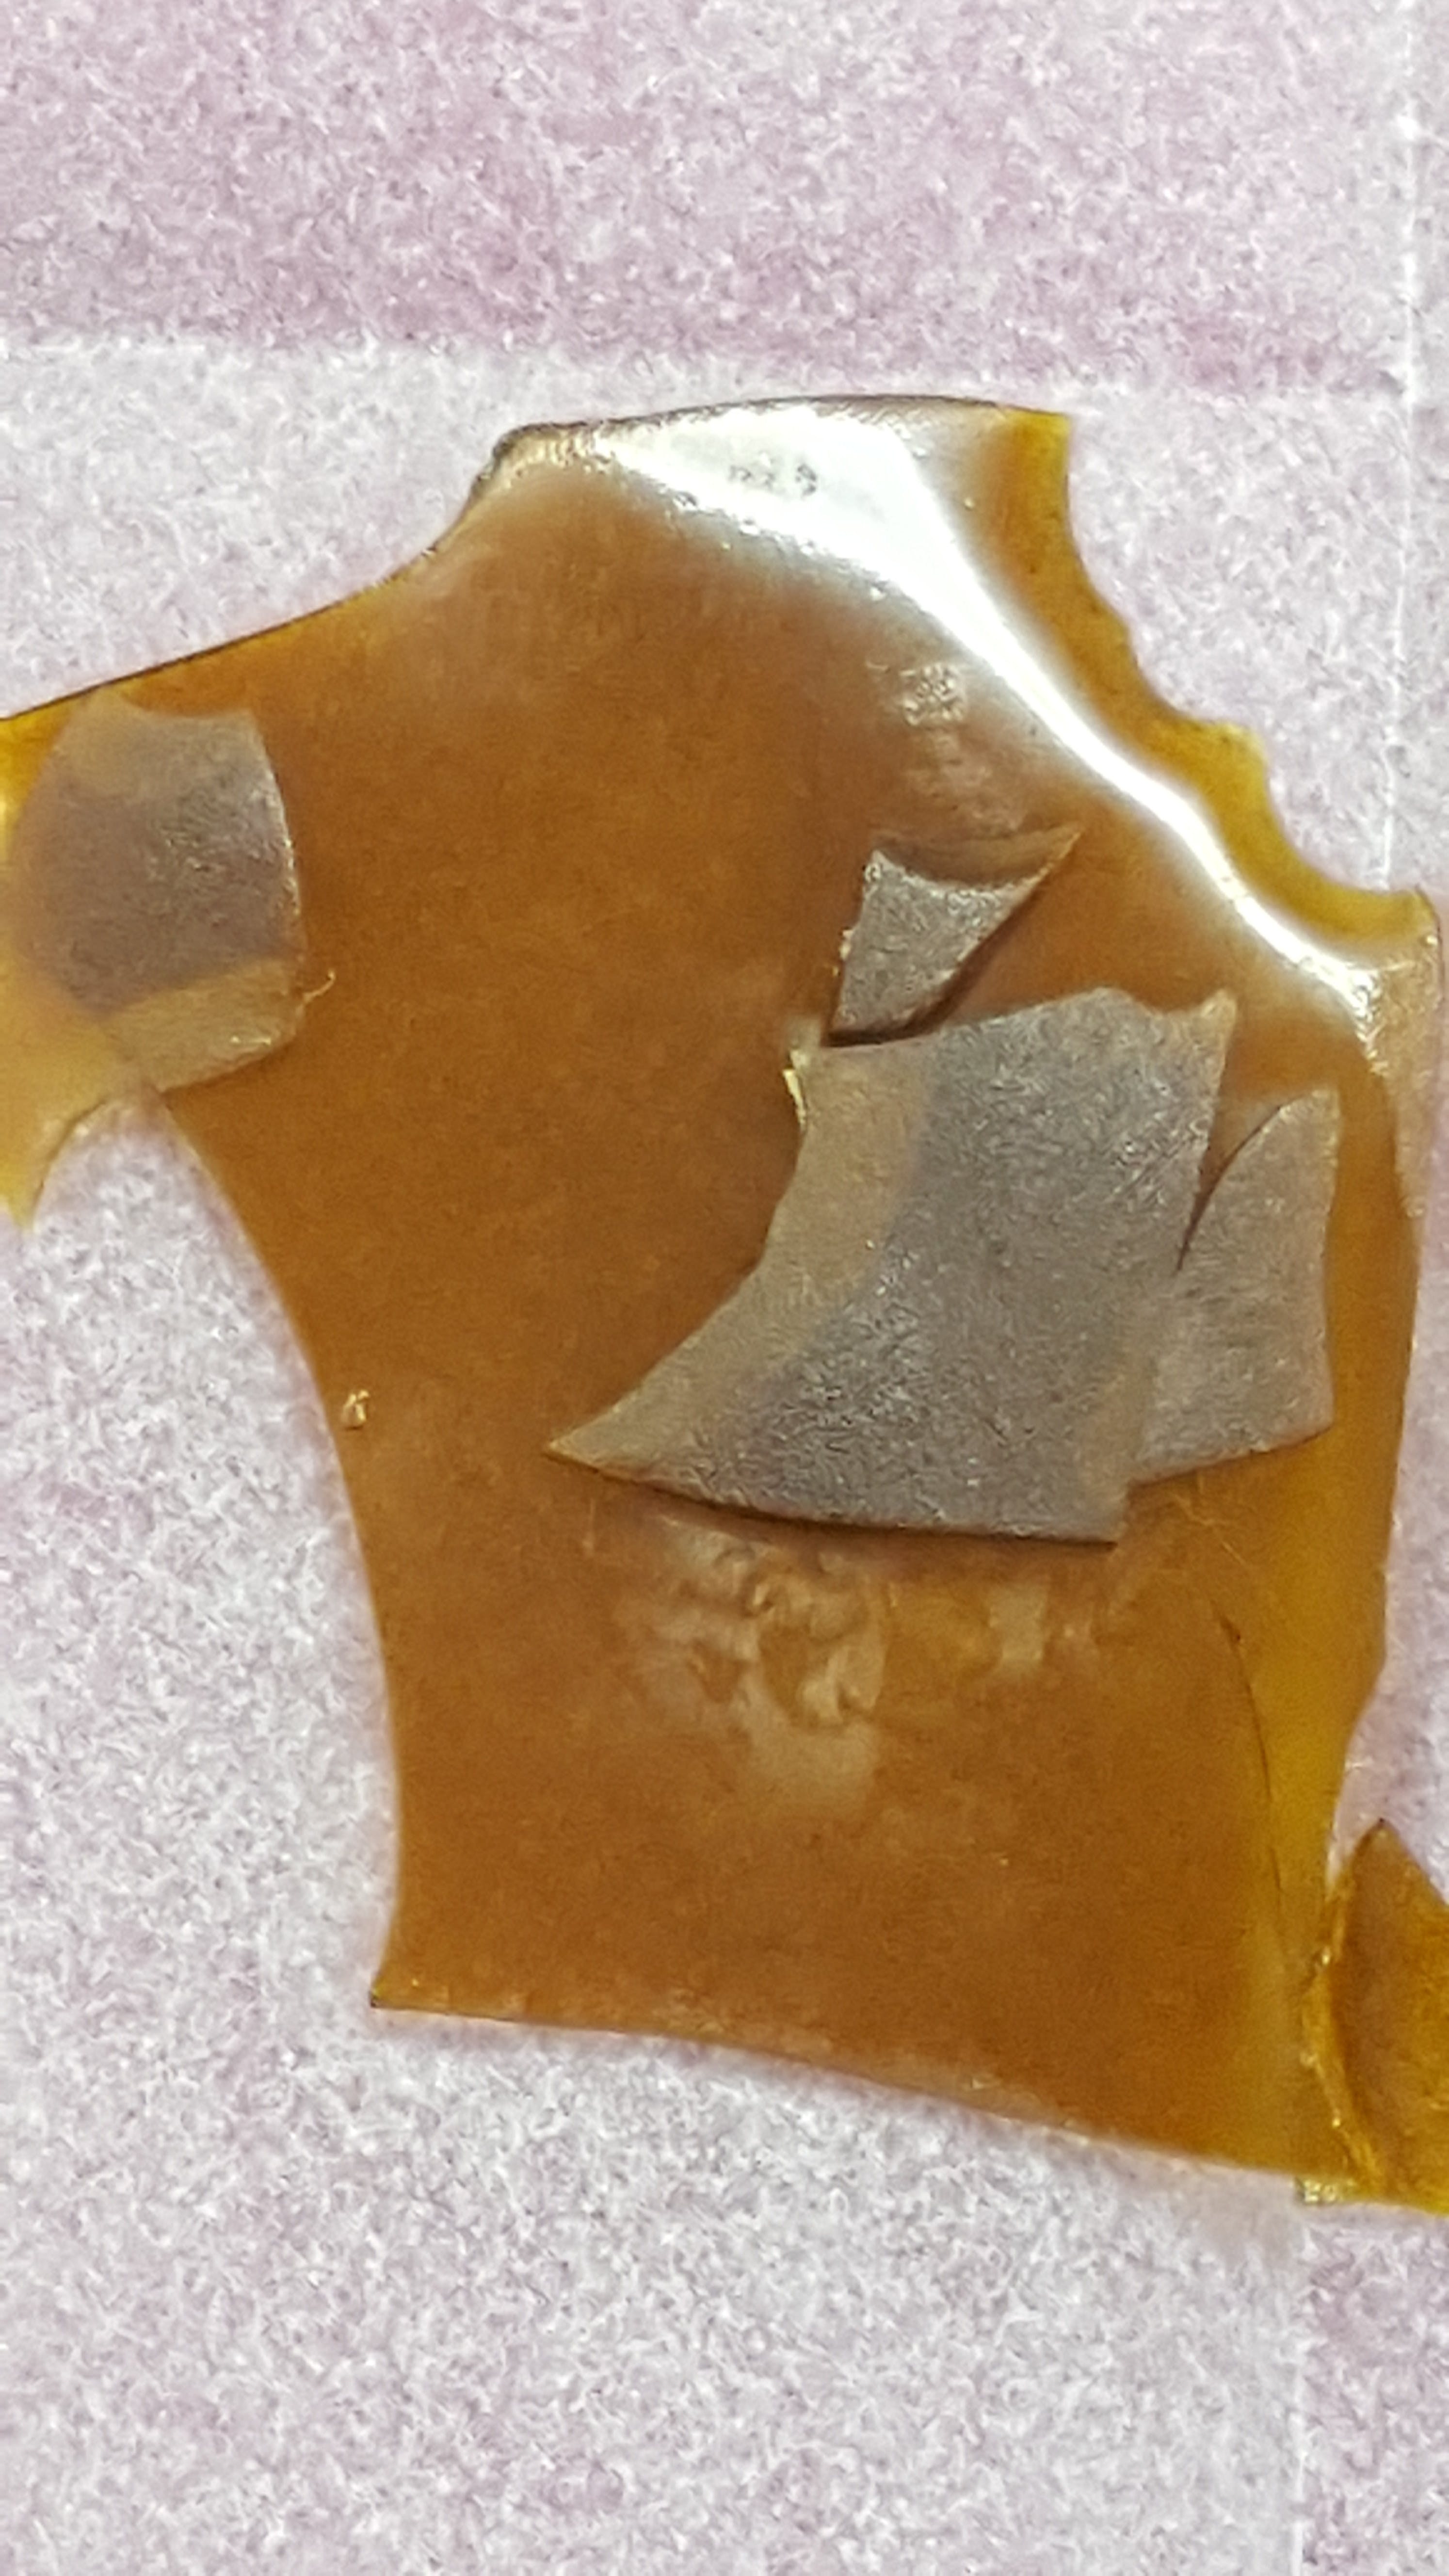 concentrate-cannasource-colorado-sweet-kush-shatter